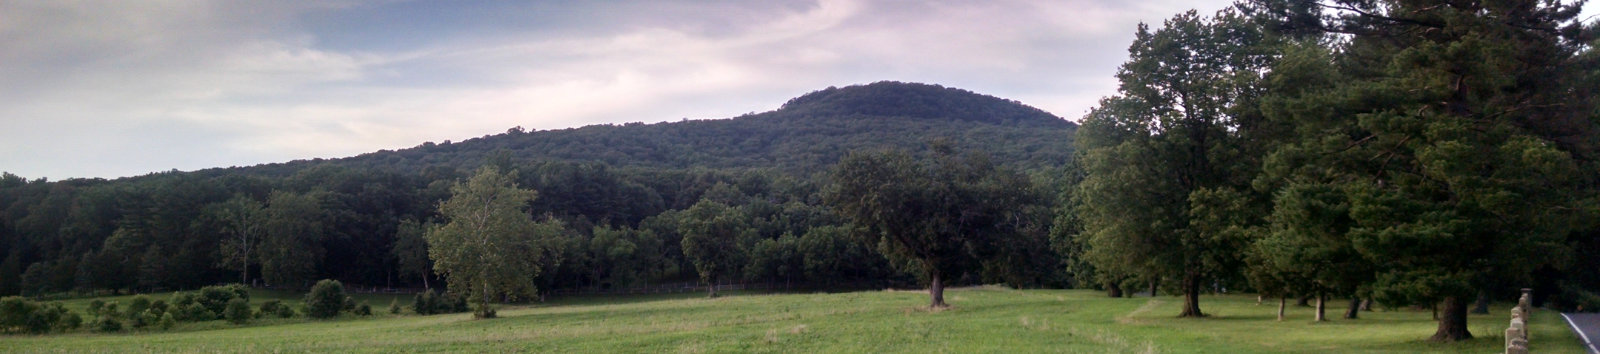 Sugarloaf Treasured Landscape Management Plan Adopted By Frederick County Planning Commission